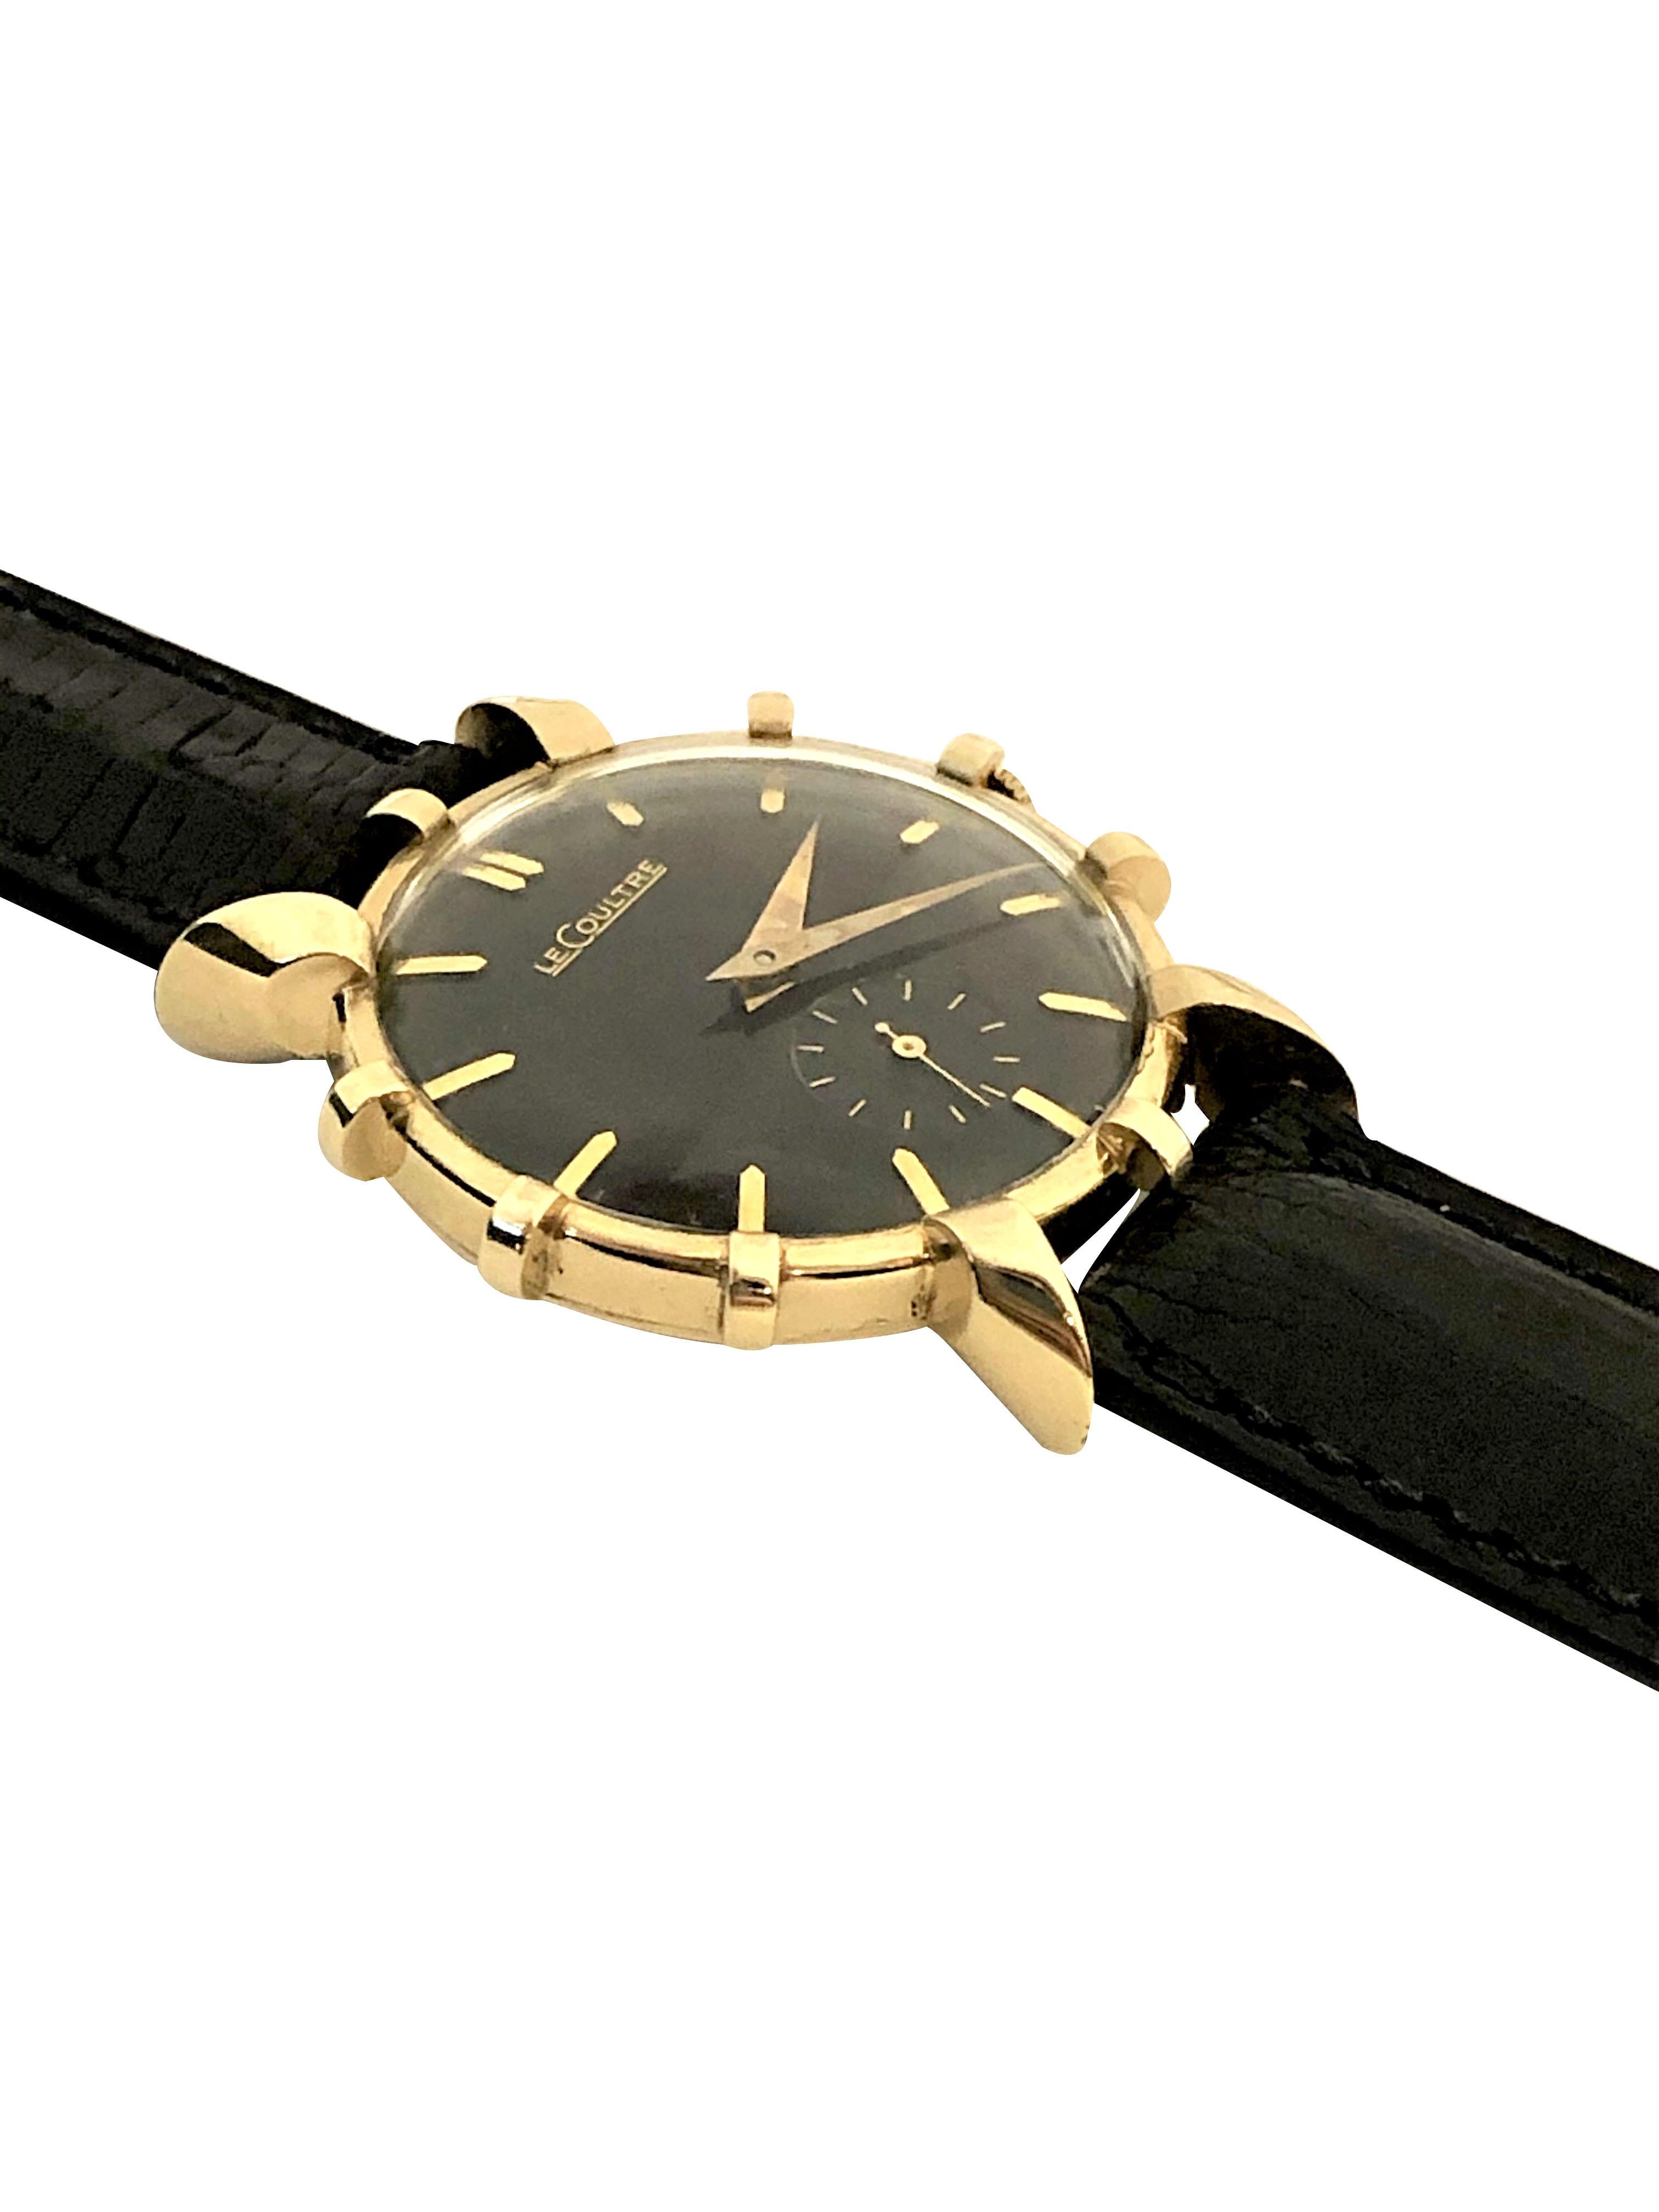 Circa 1950 LeCoultre Wrist watch, 32 M.M. 14K Yellow Gold 2 piece case with Flared Lugs and Flared case mountings. 17 Jewel Mechanical, Manual wind nickle lever movement. Black dial with raised gold markers, sub seconds chapter. New Black padded